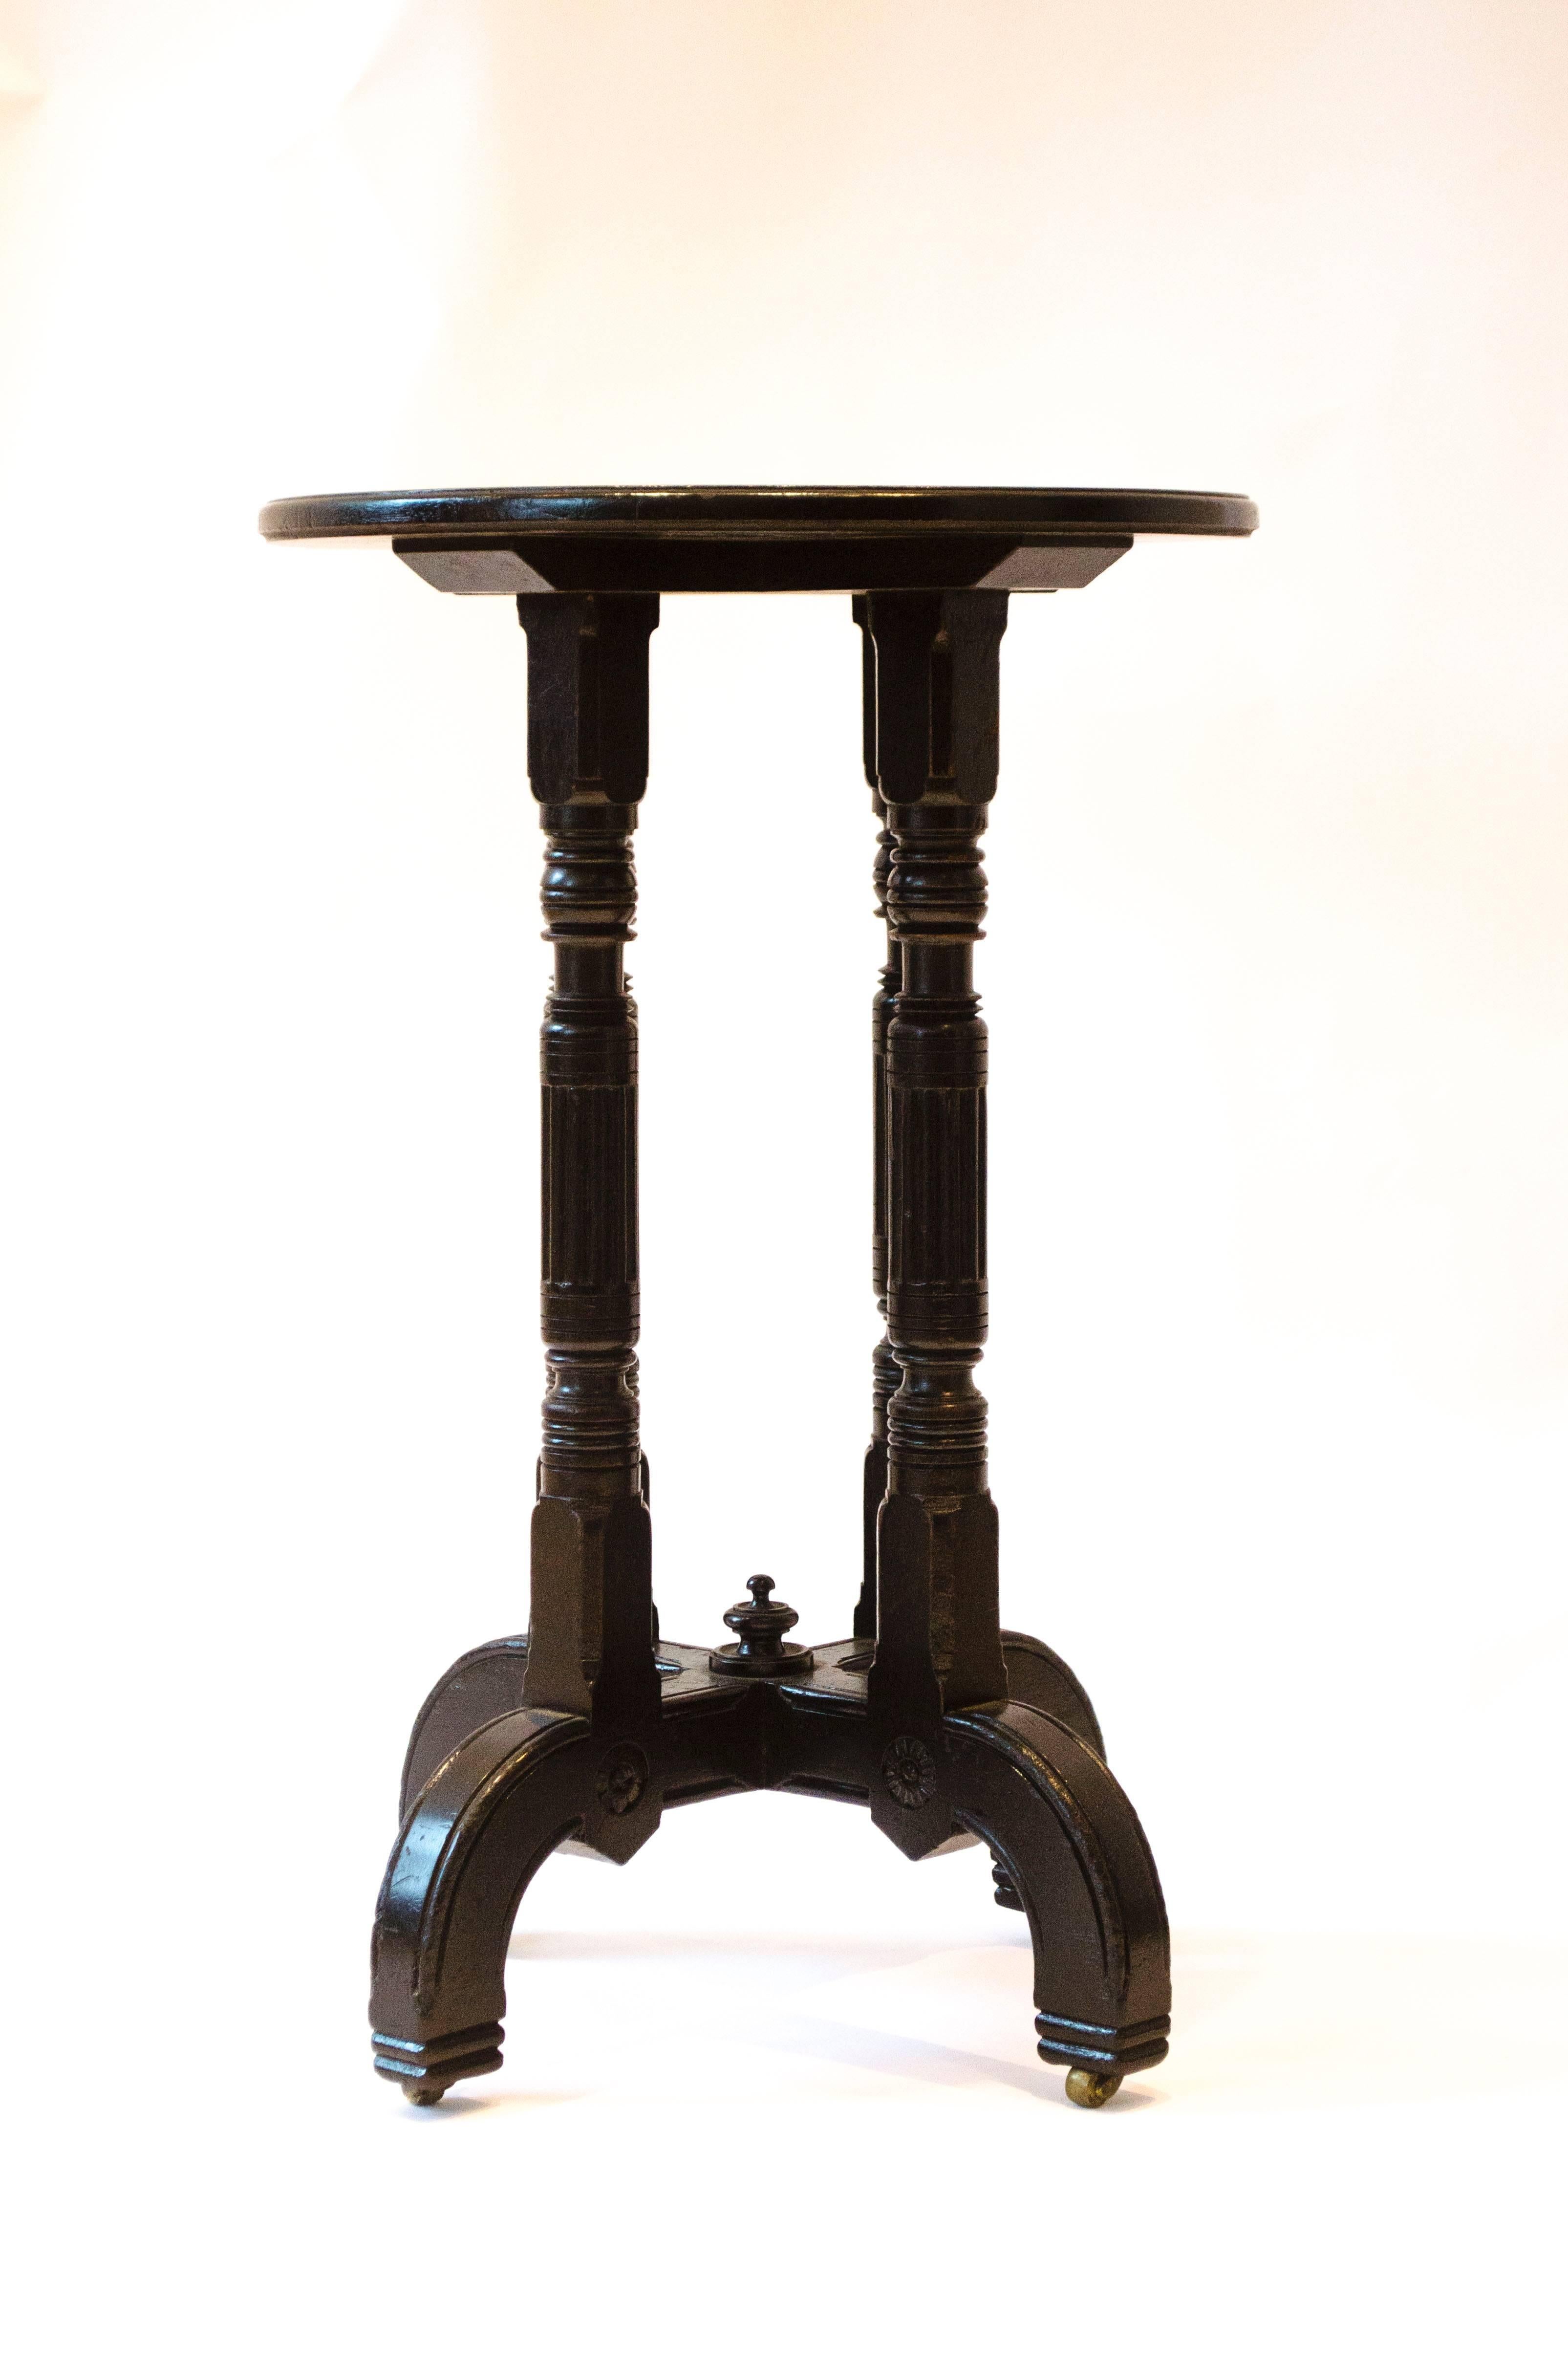 English Bruce Talbert attri, for Gillows & Co. An Aesthetic Movement Circular Wine Table